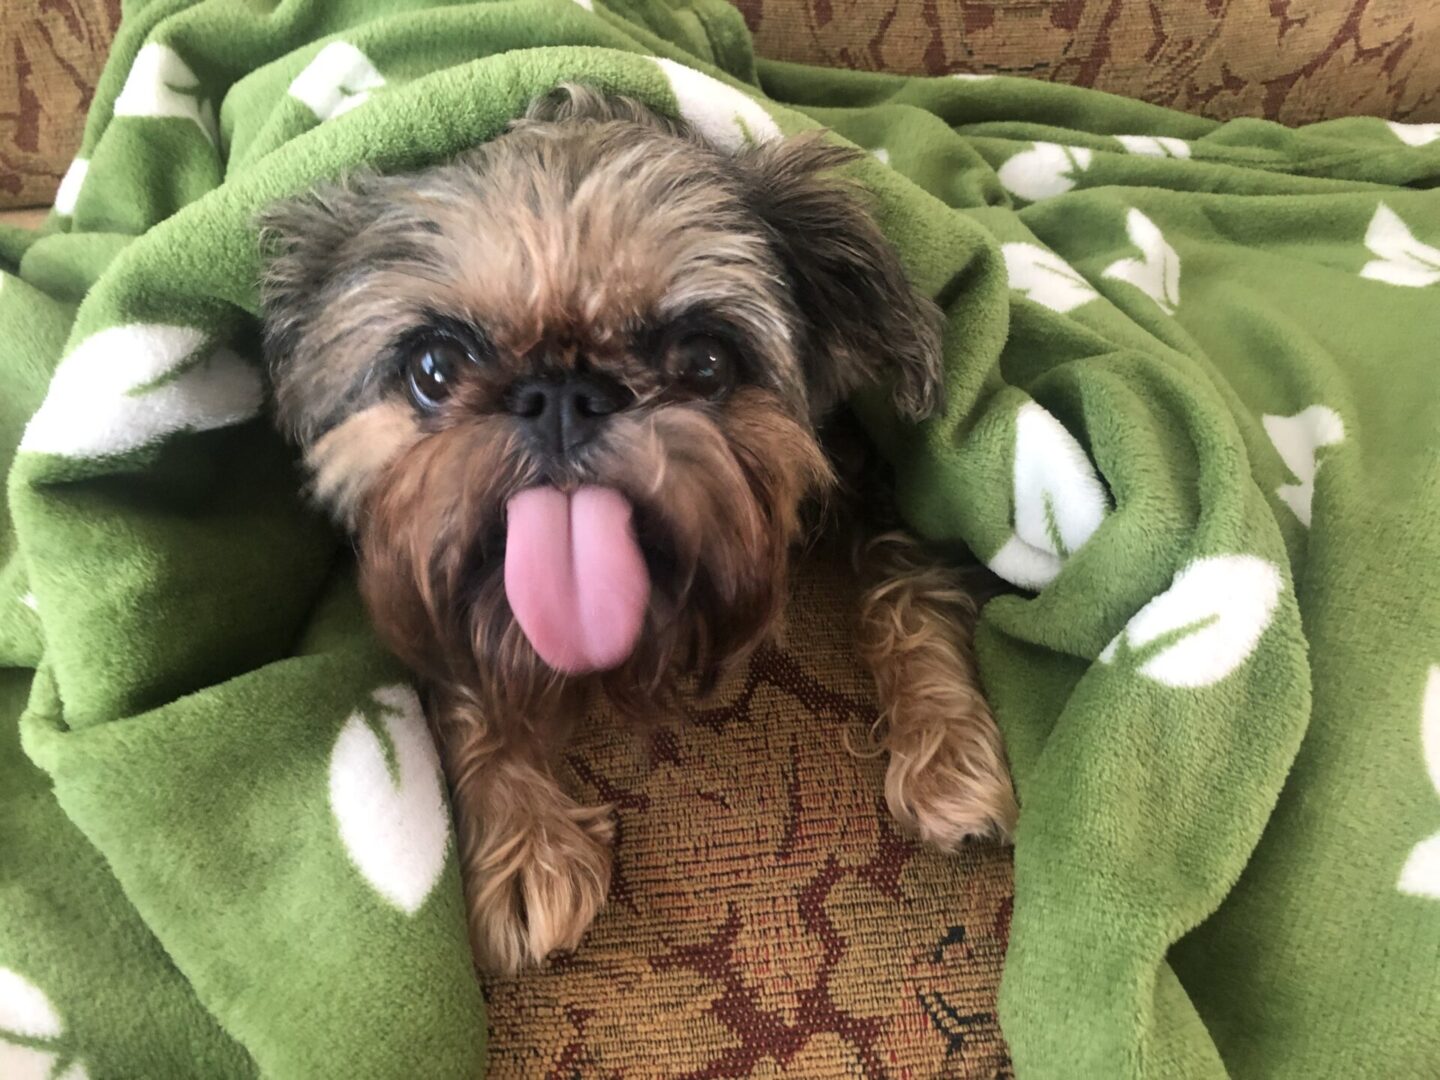 A brown Brussels Griffon with its tongue out under a green blanket